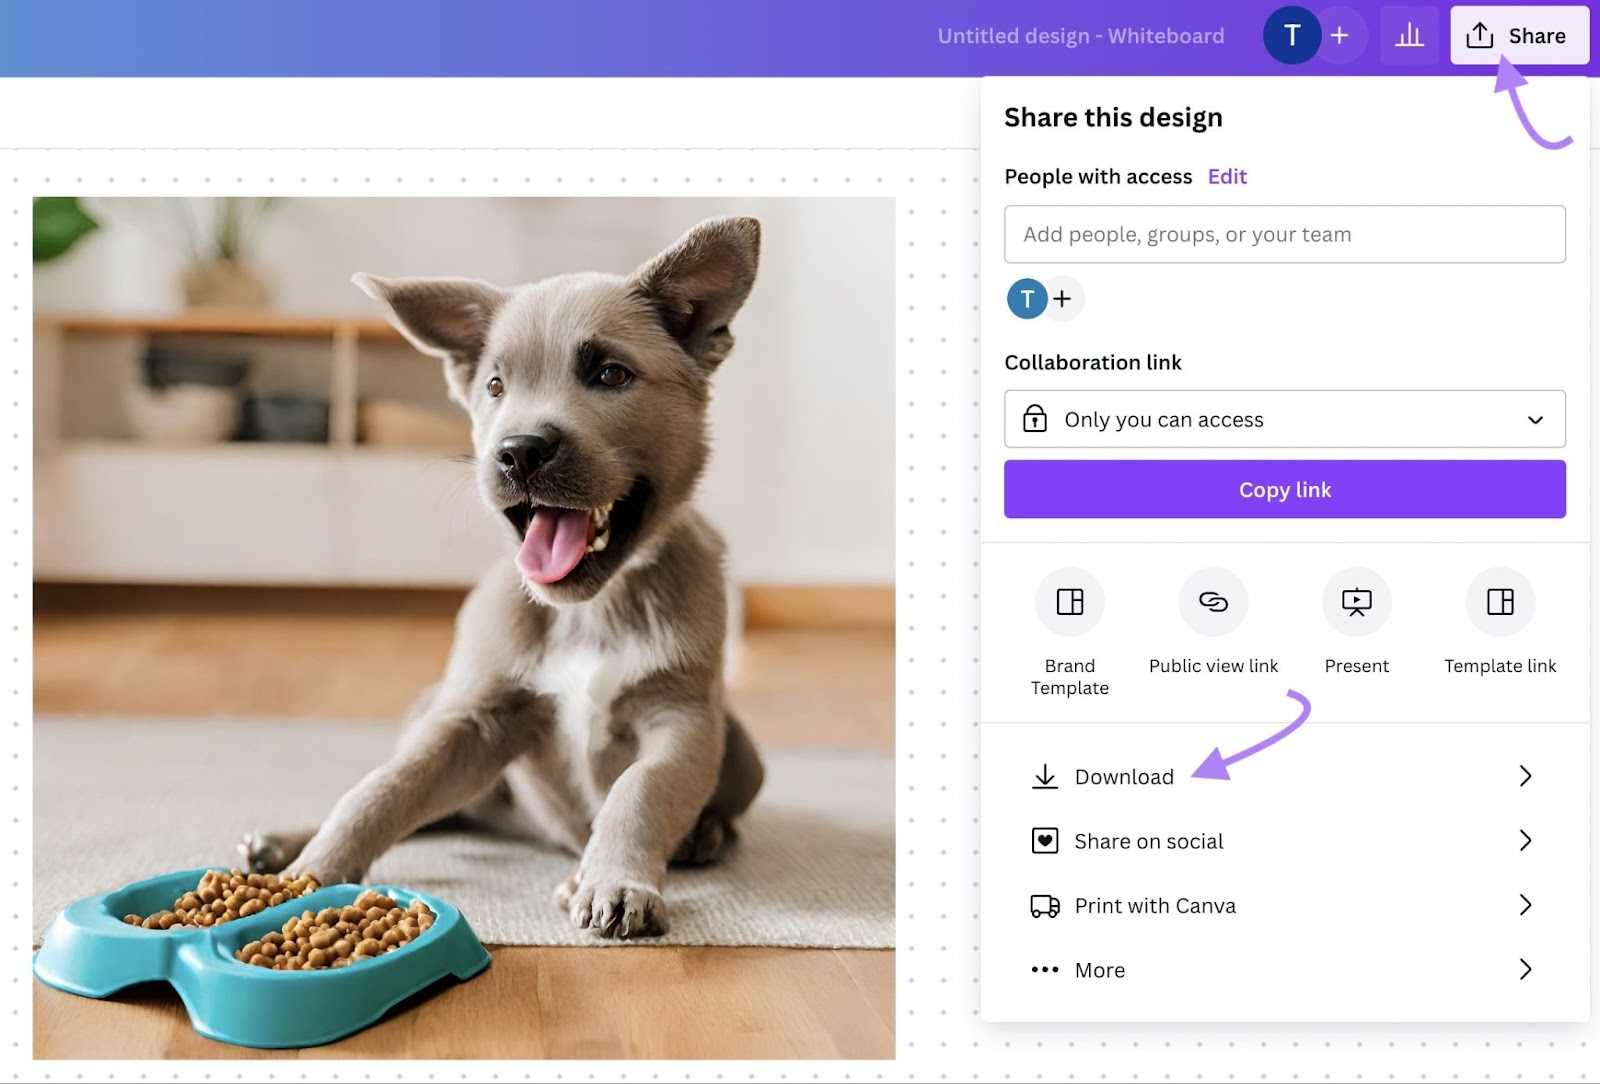 Download a cute puppy eating  food image from Canva's Magic Media tool